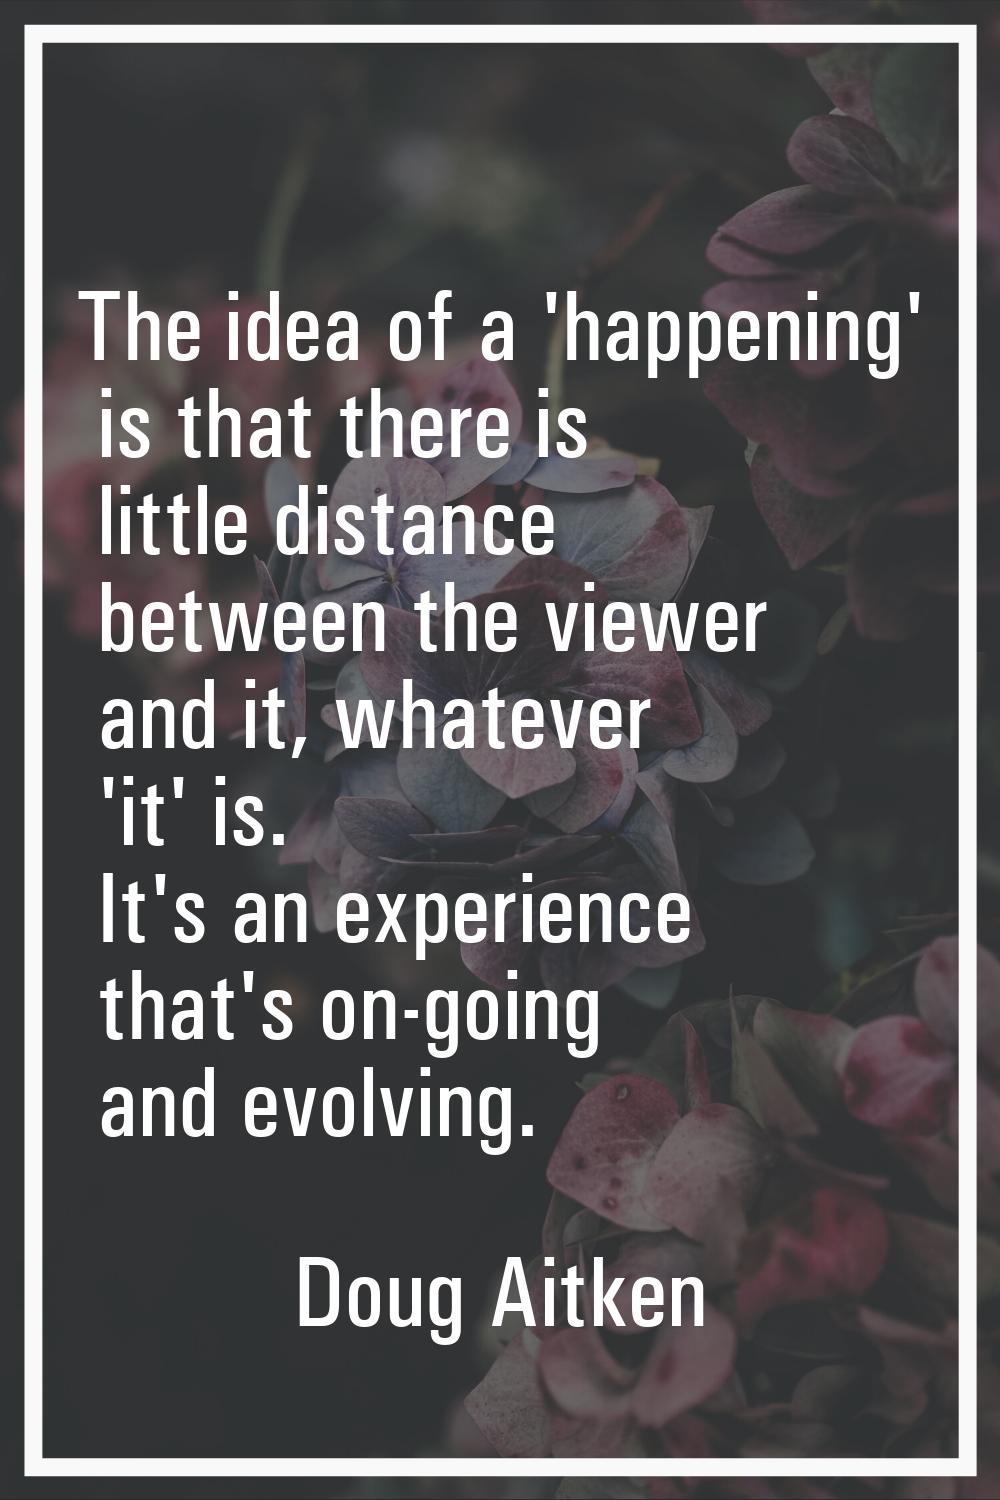 The idea of a 'happening' is that there is little distance between the viewer and it, whatever 'it'